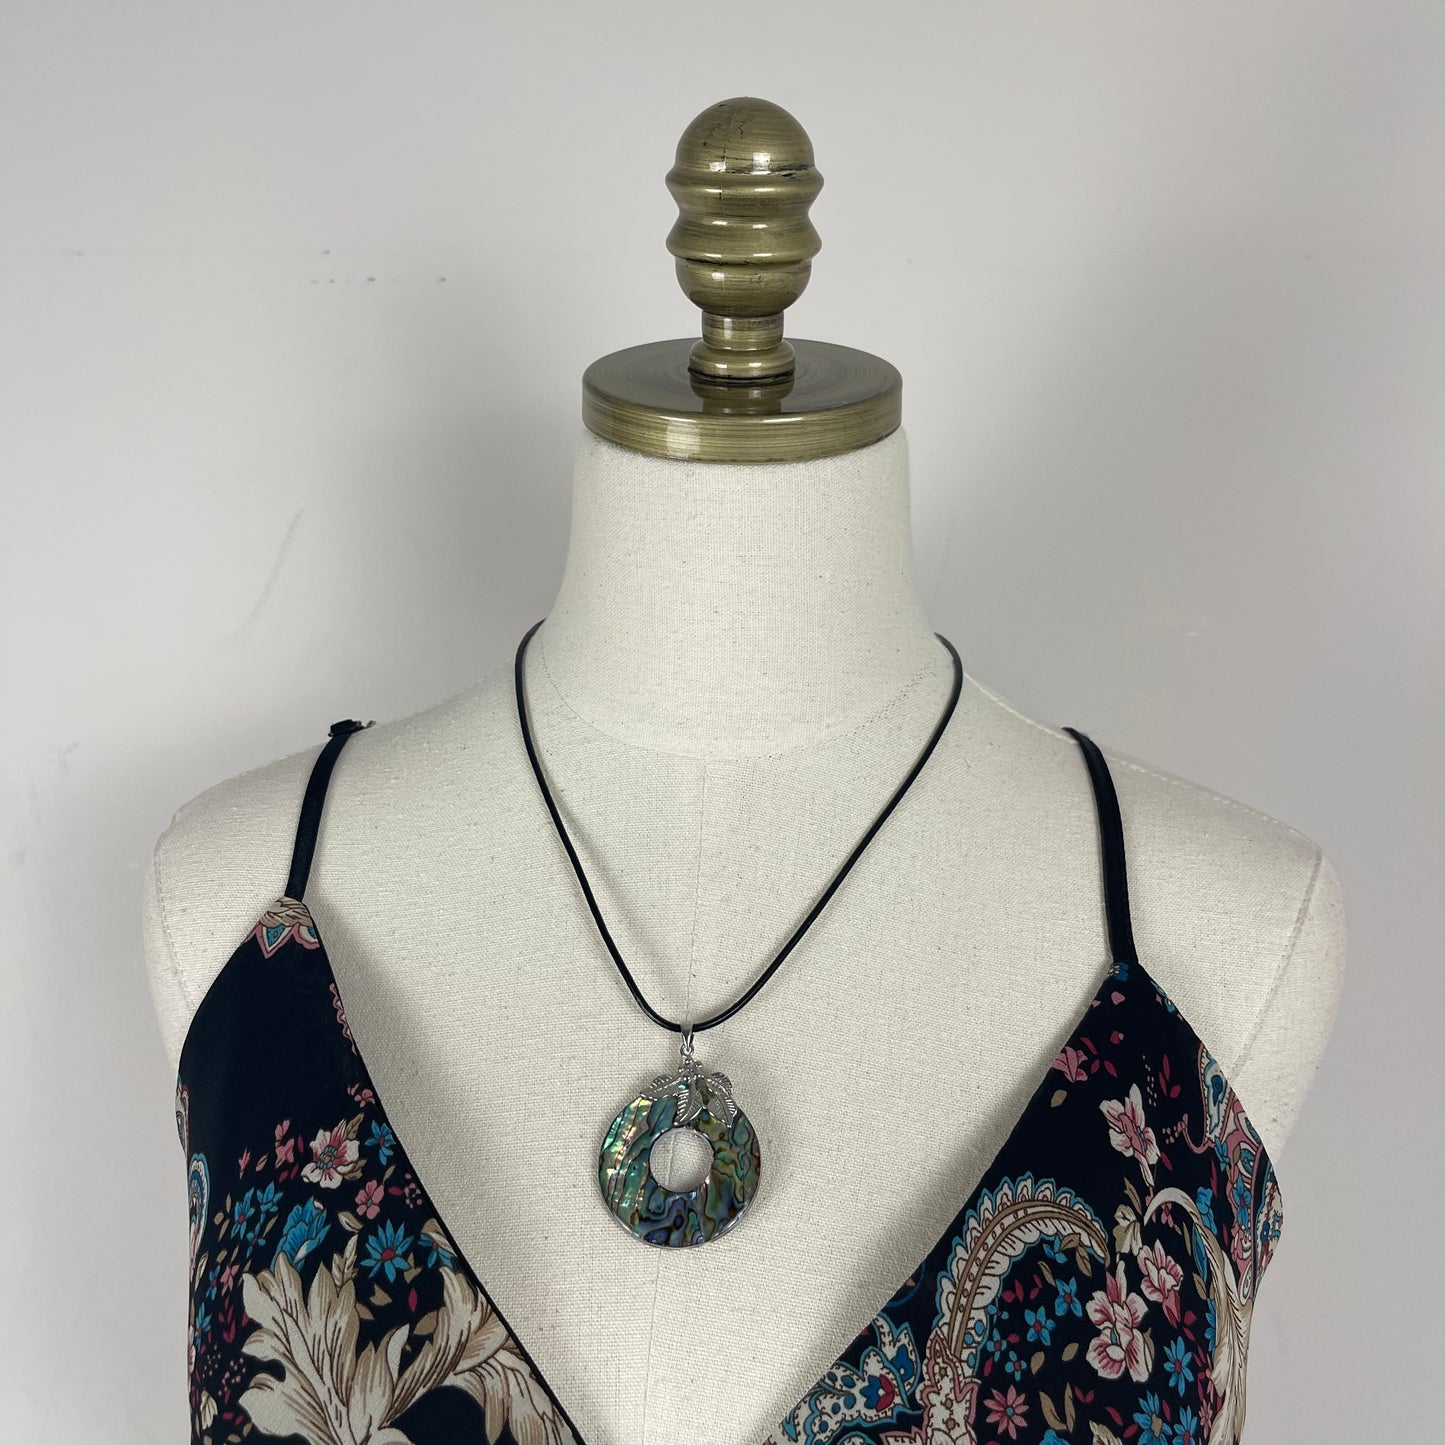 Vintage Round Pendant Rope Necklace